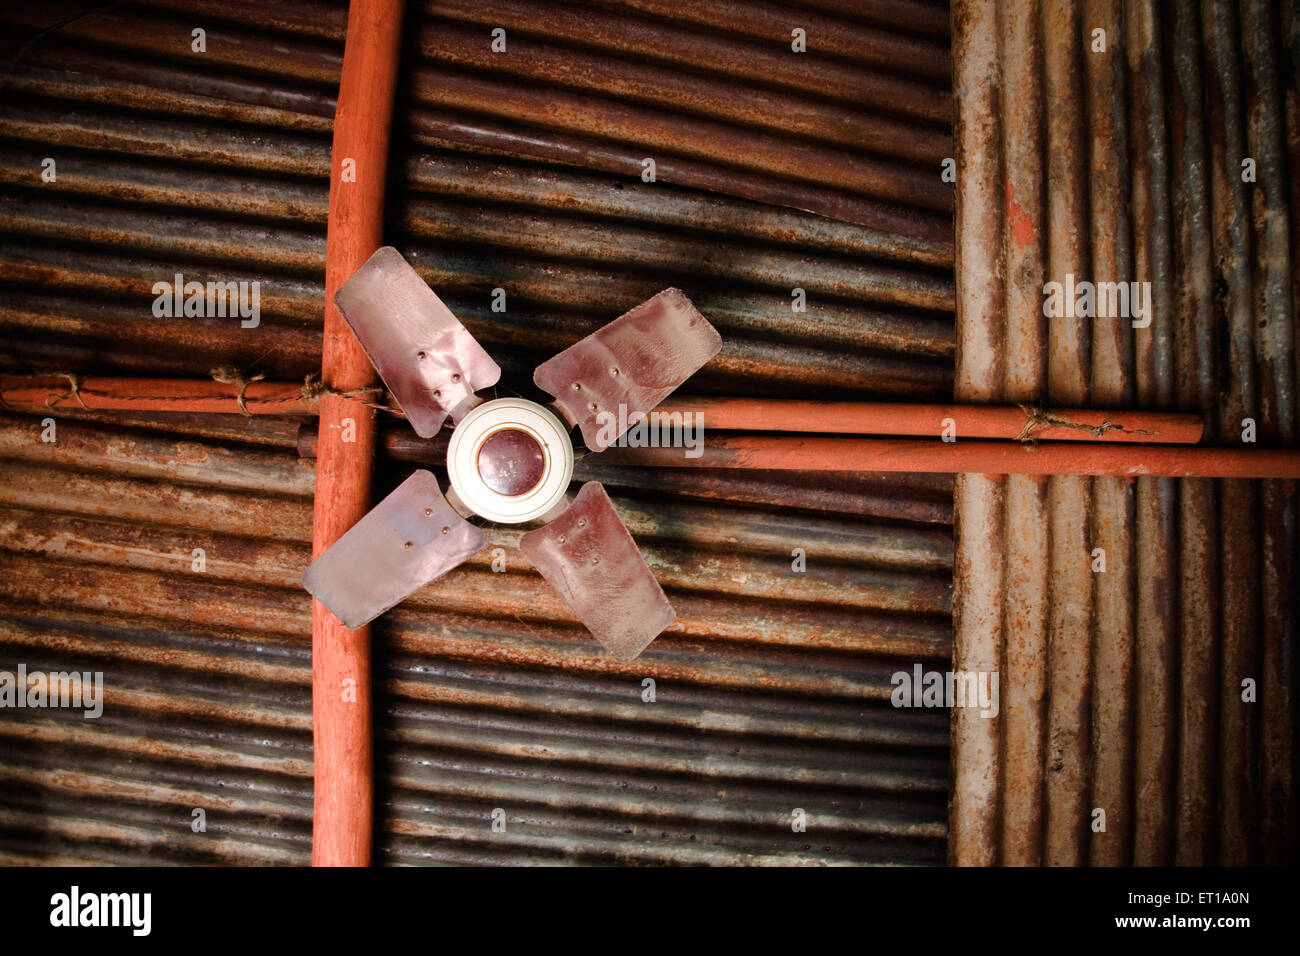 Ceiling Fans Stock Photos Ceiling Fans Stock Images Page